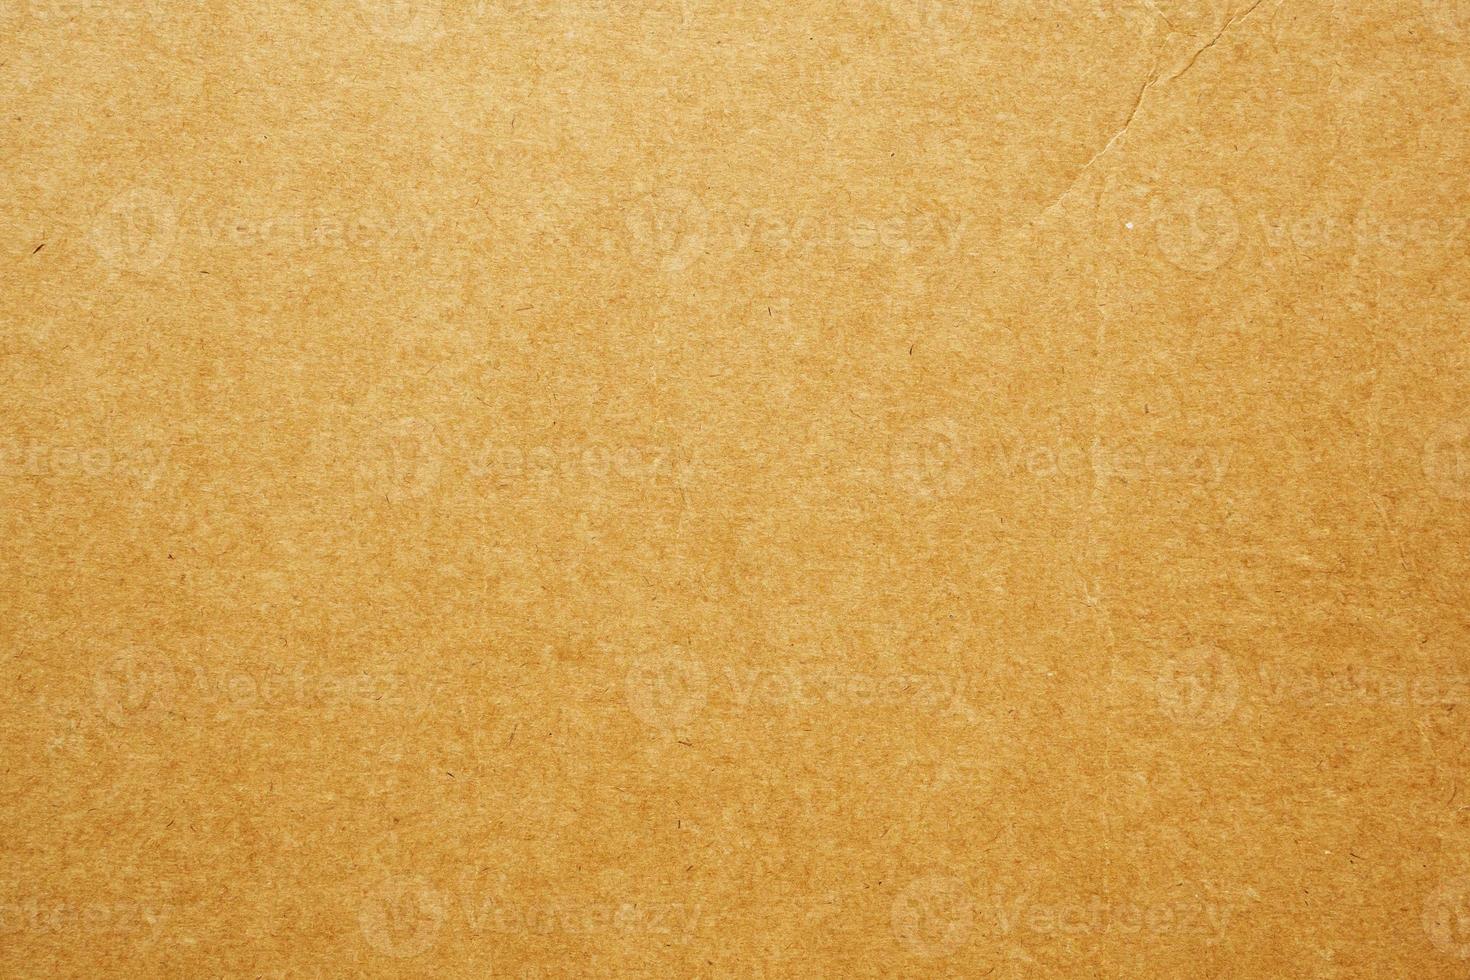 Brown eco recycled kraft paper sheet texture cardboard background photo